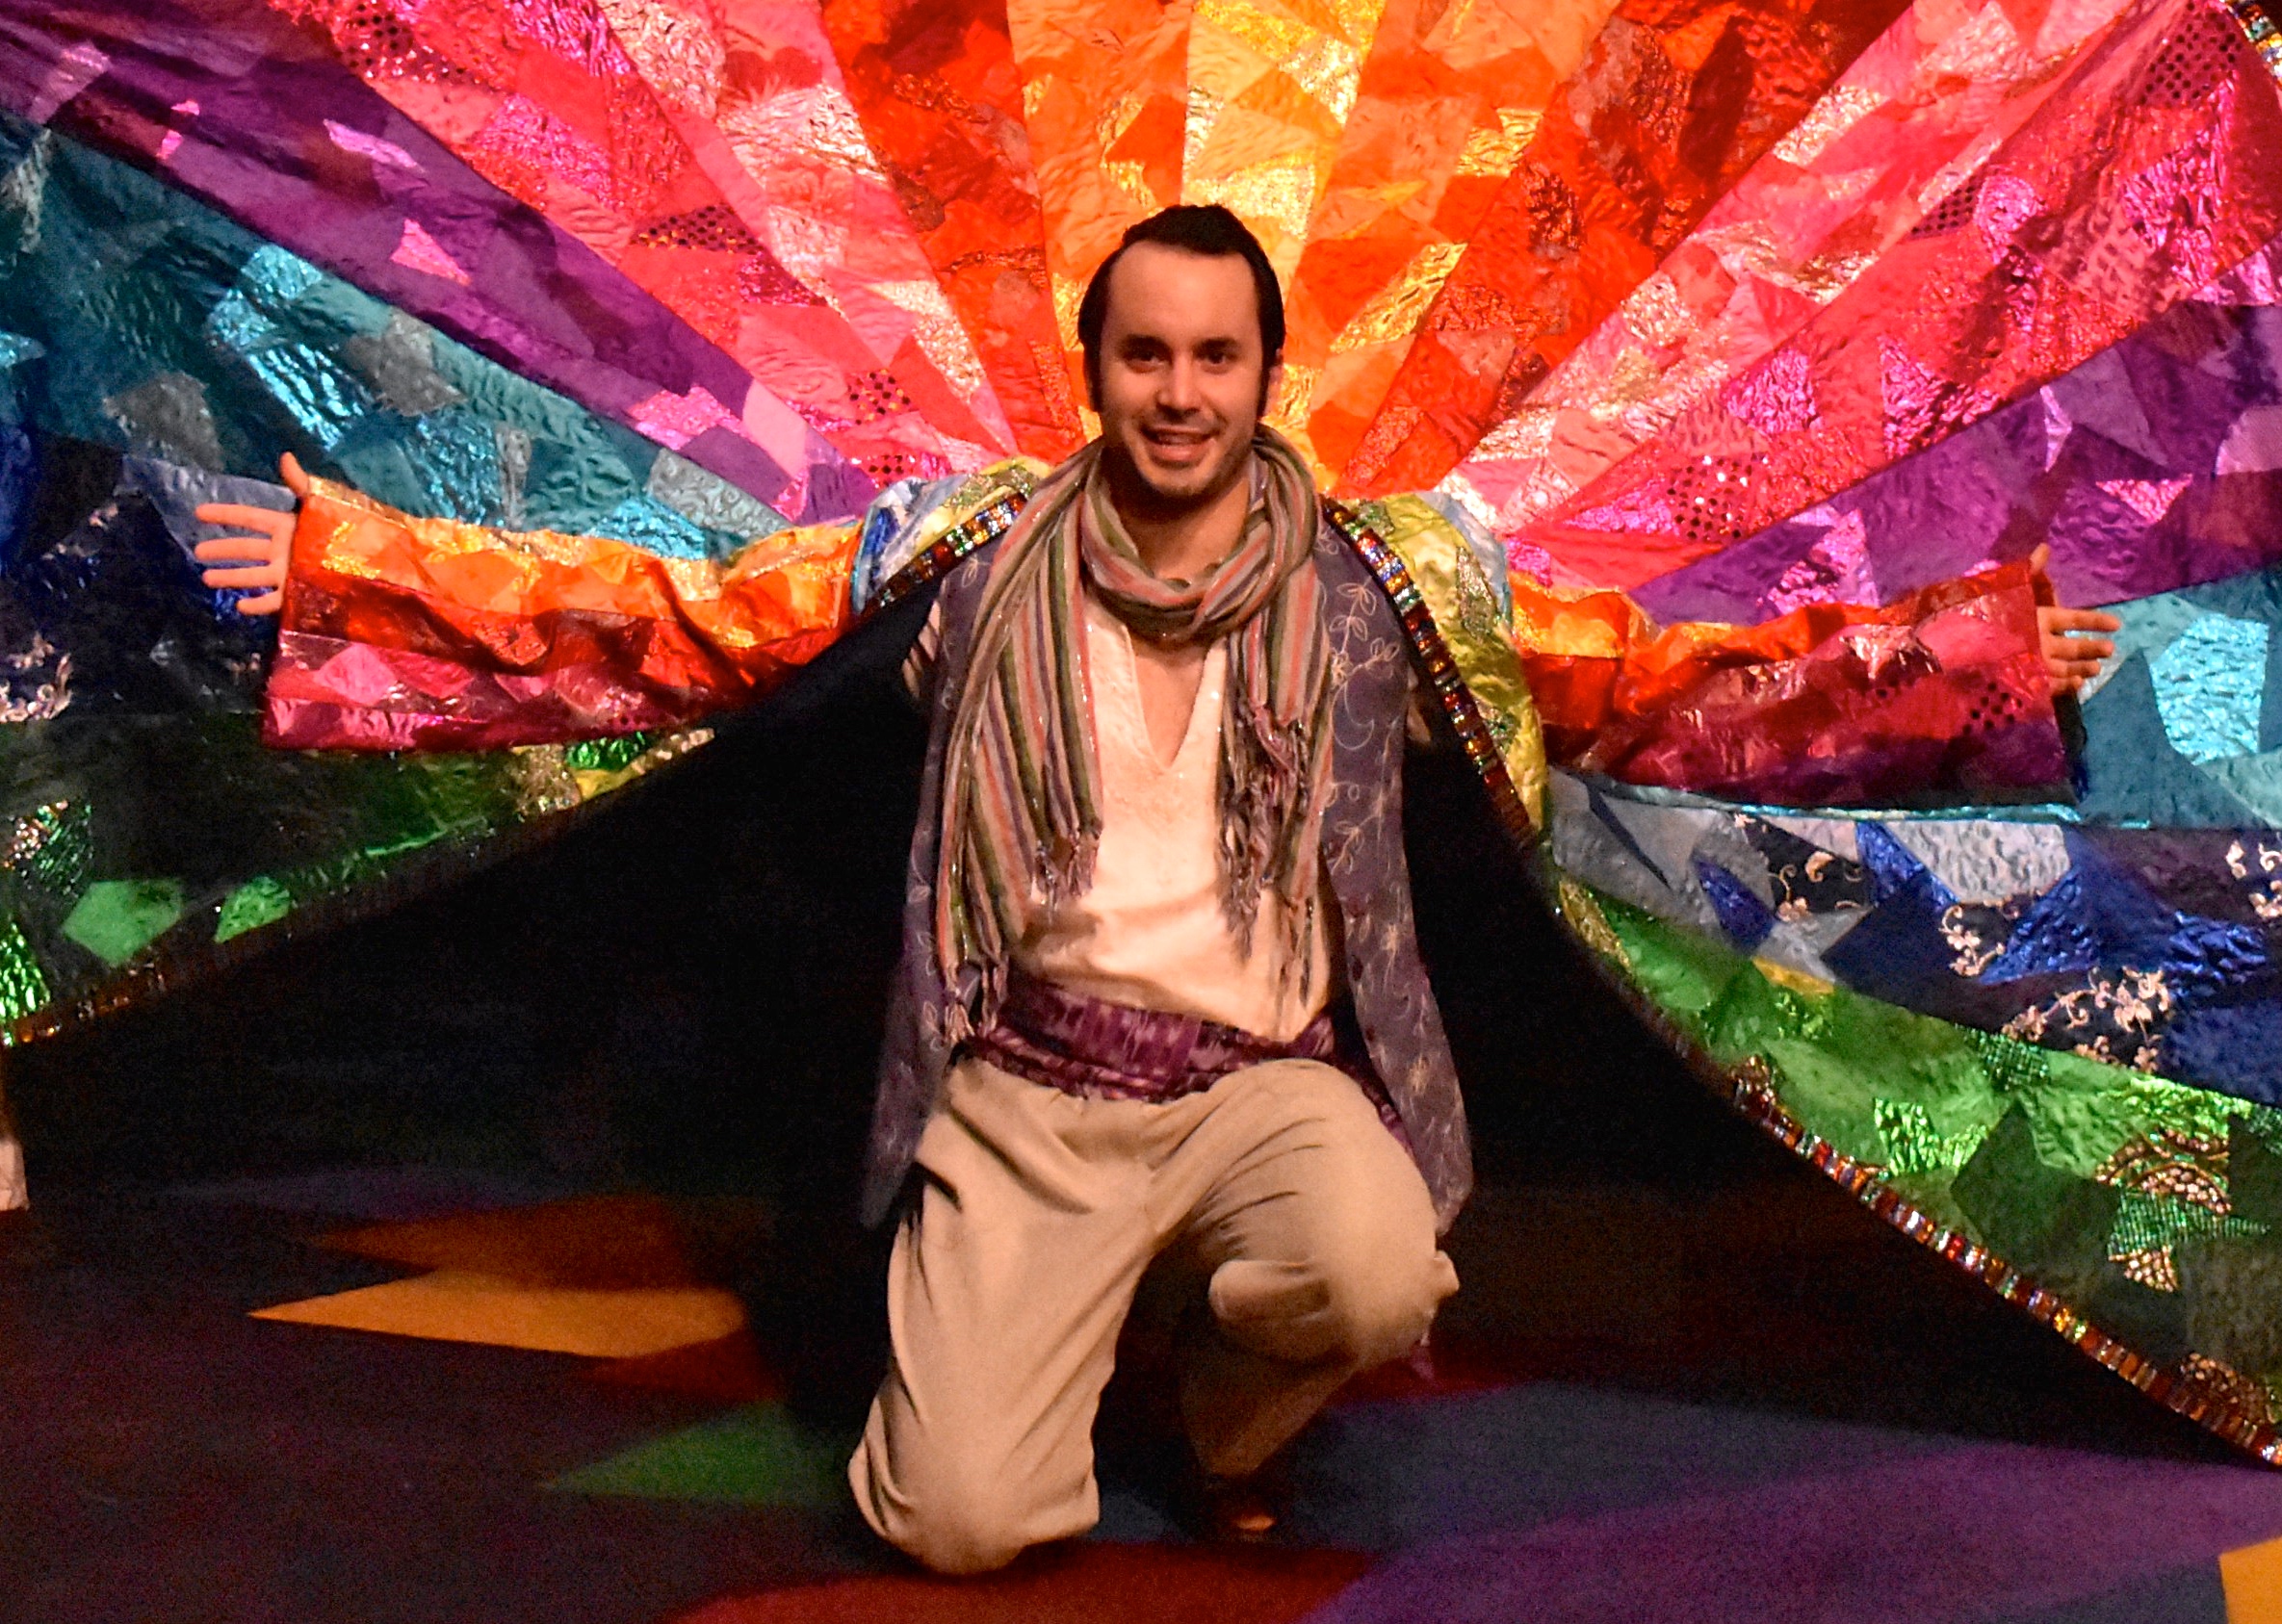 “Joseph and the Amazing Technicolor Dreamcoat” opens at Actors Cabaret for a three-week run